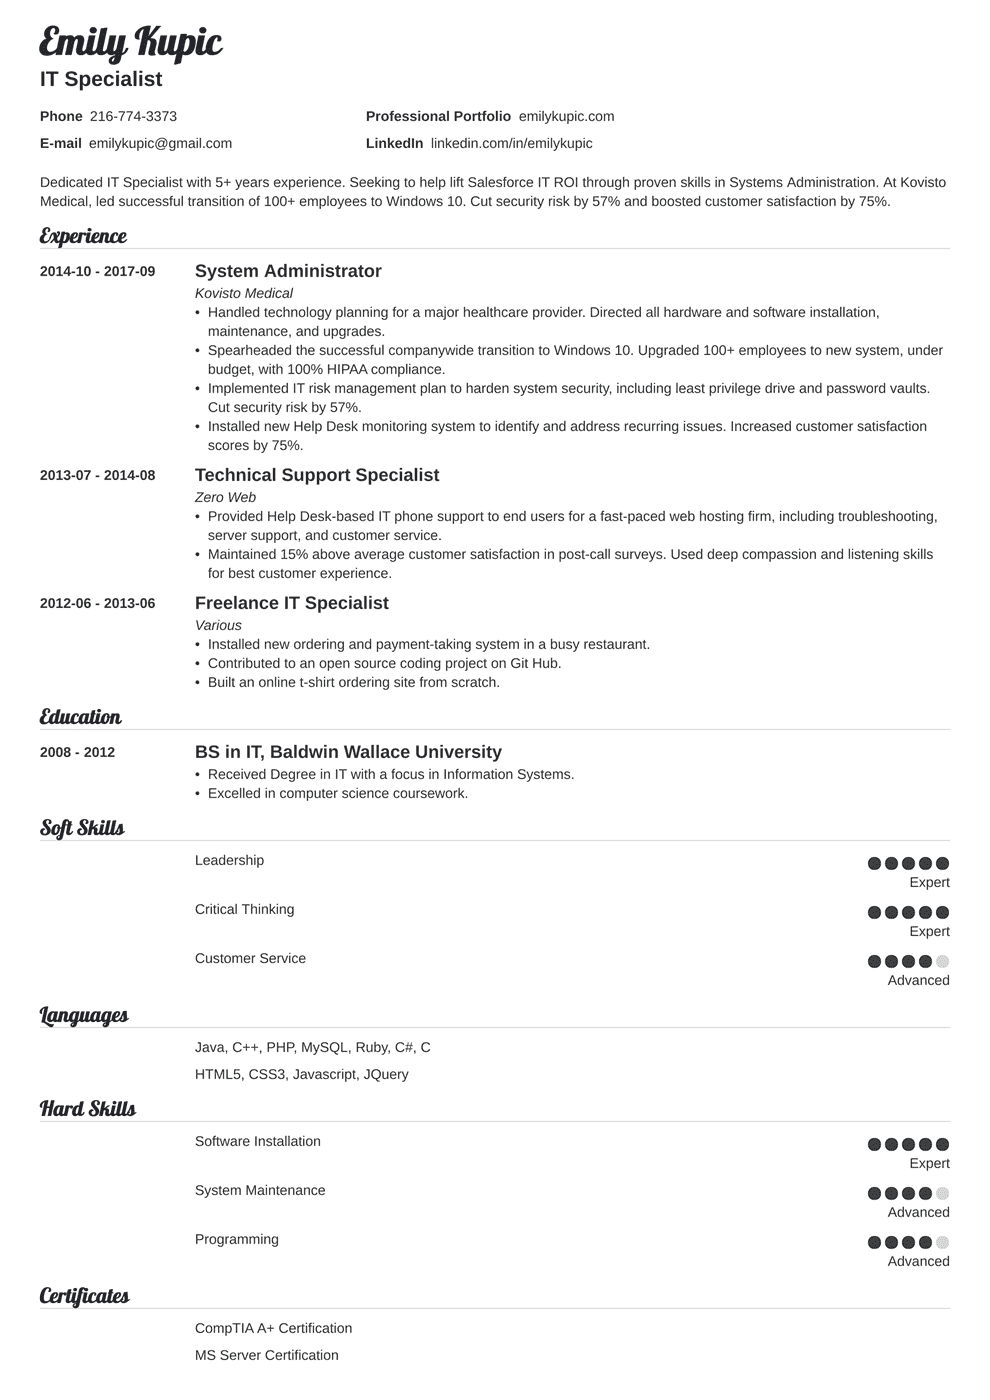 Technical Resume: Template, Guide & 20+ Examples